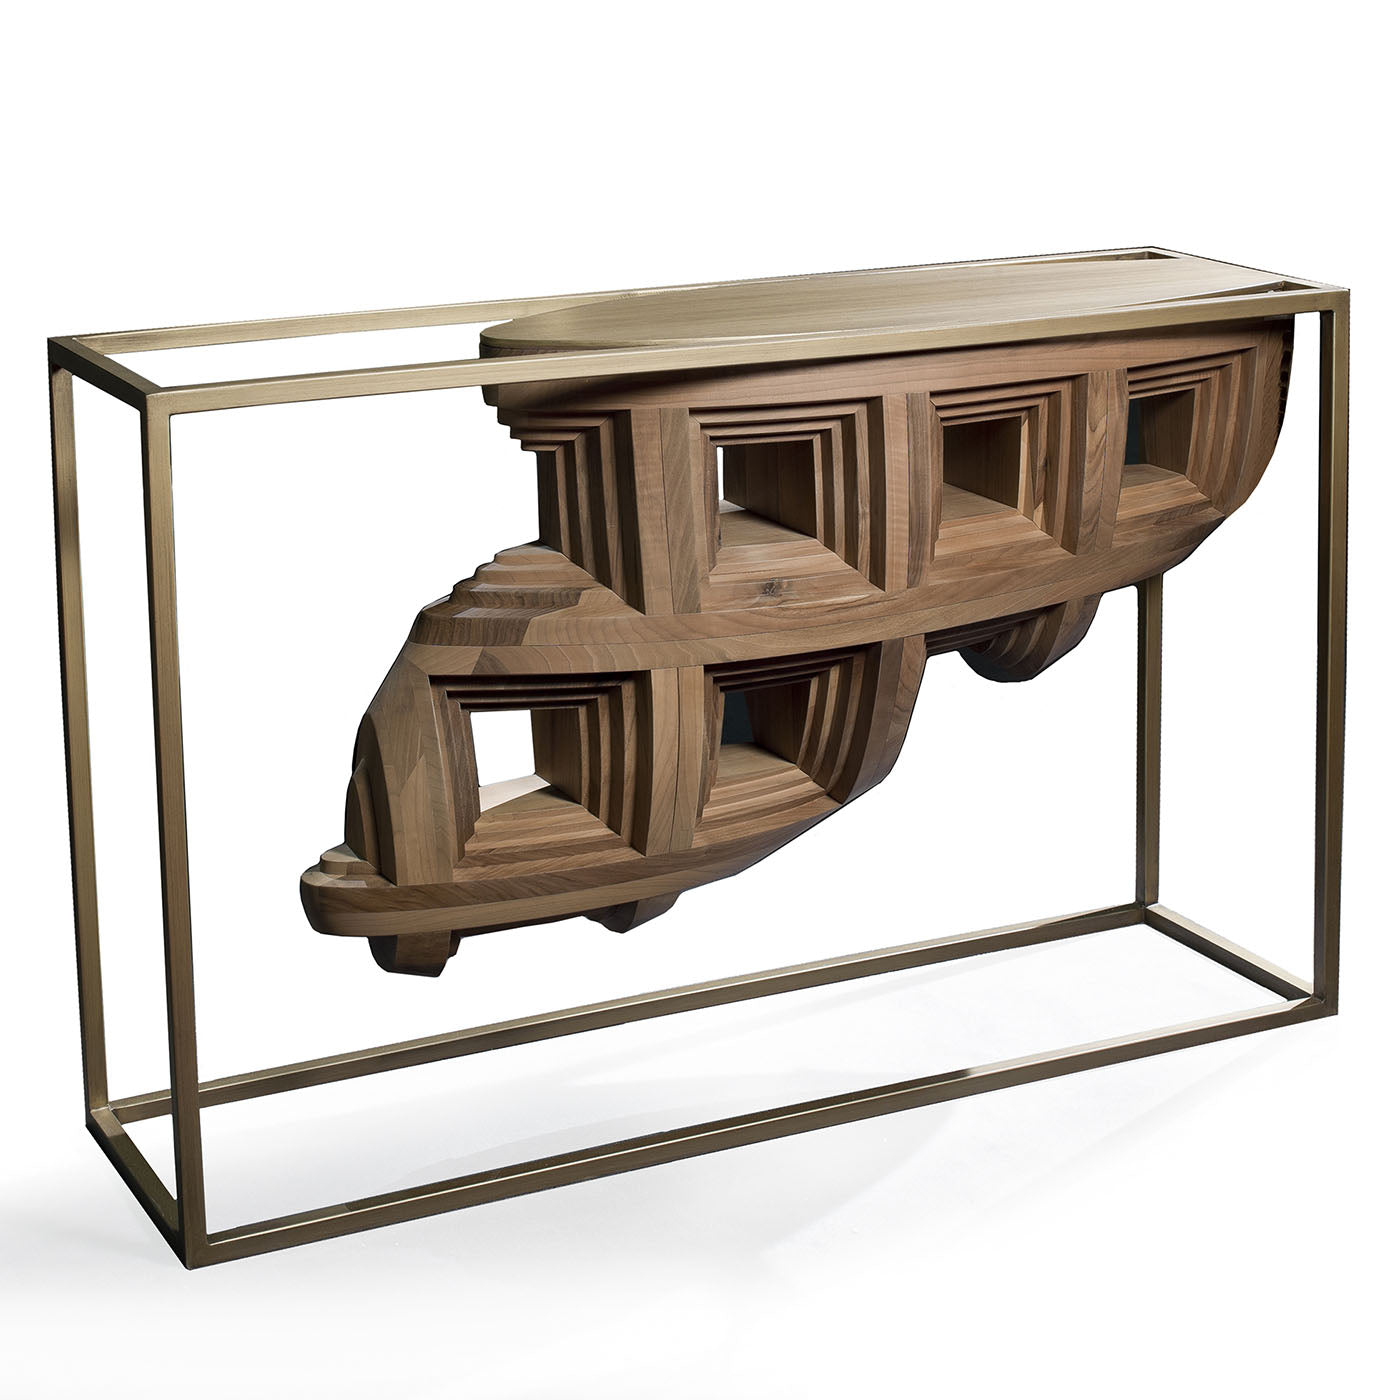 Rebus Console Table By Analogia Project - Alternative view 2